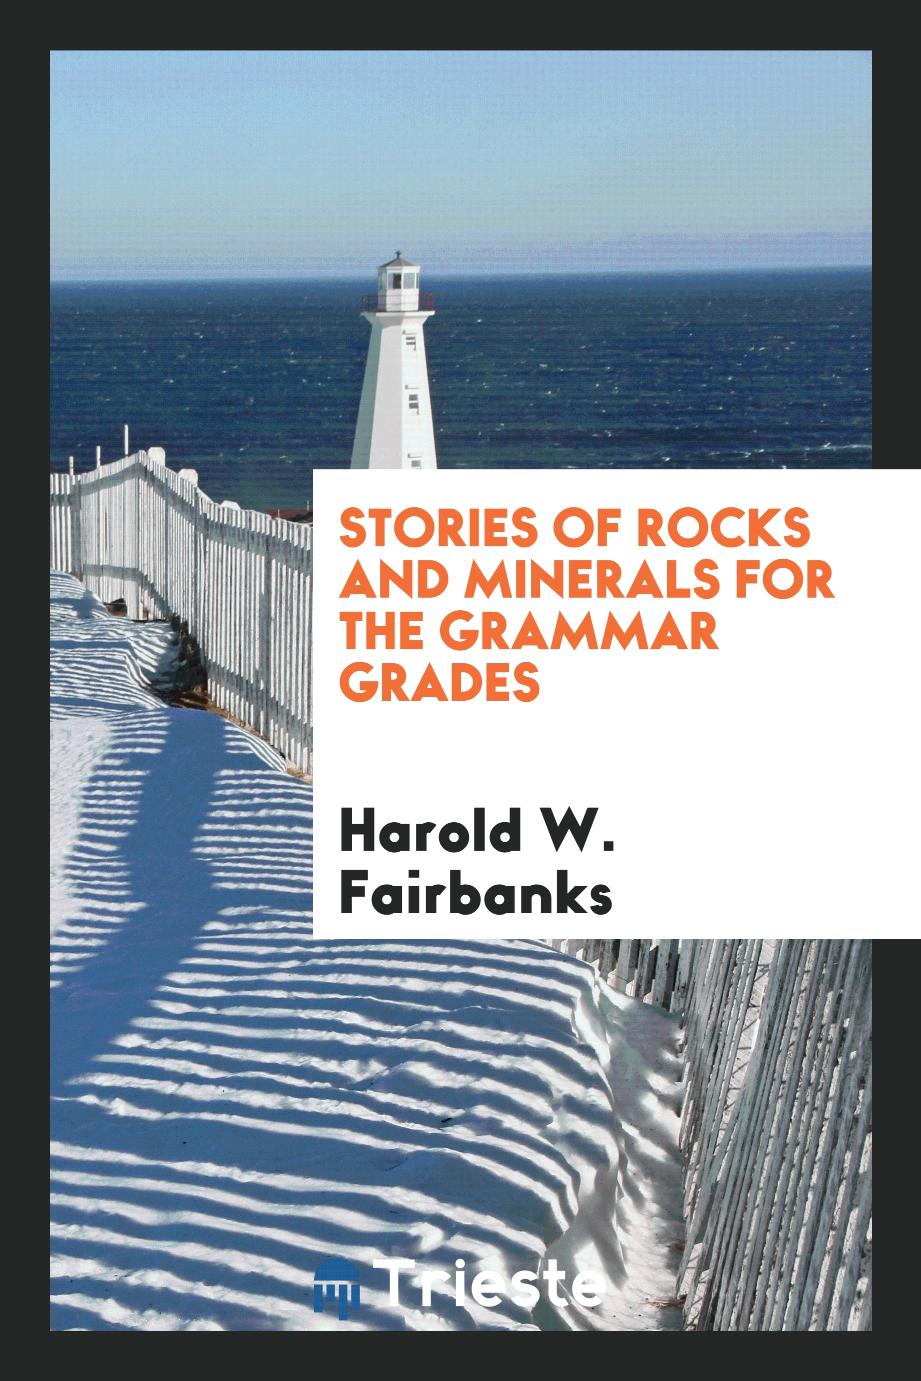 Stories of rocks and minerals for the grammar grades